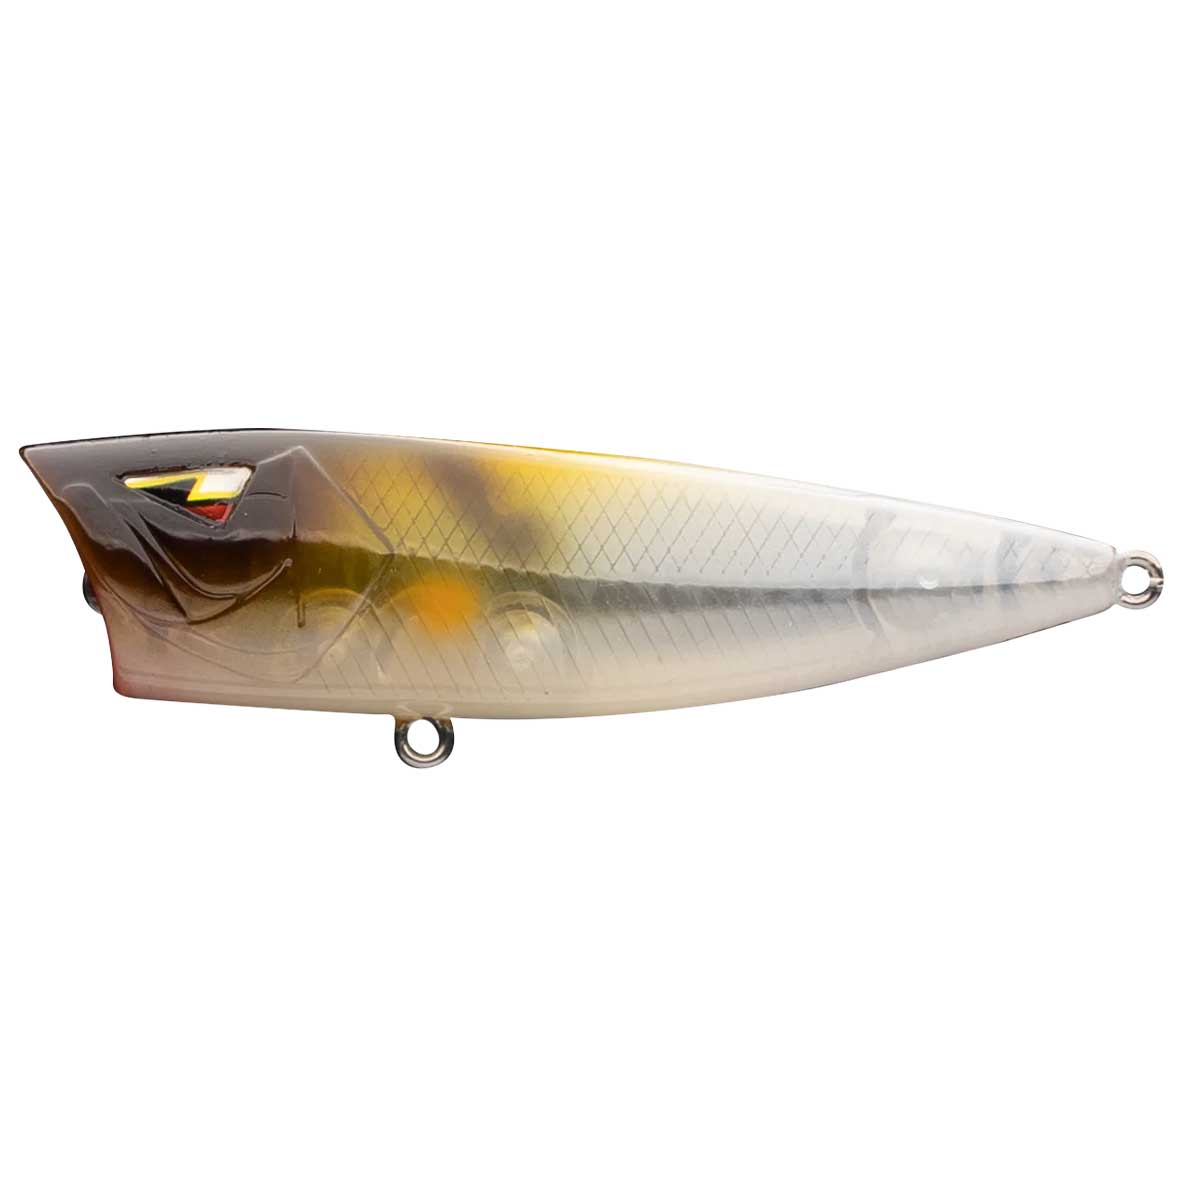 Topwater Popper 70_LY Special